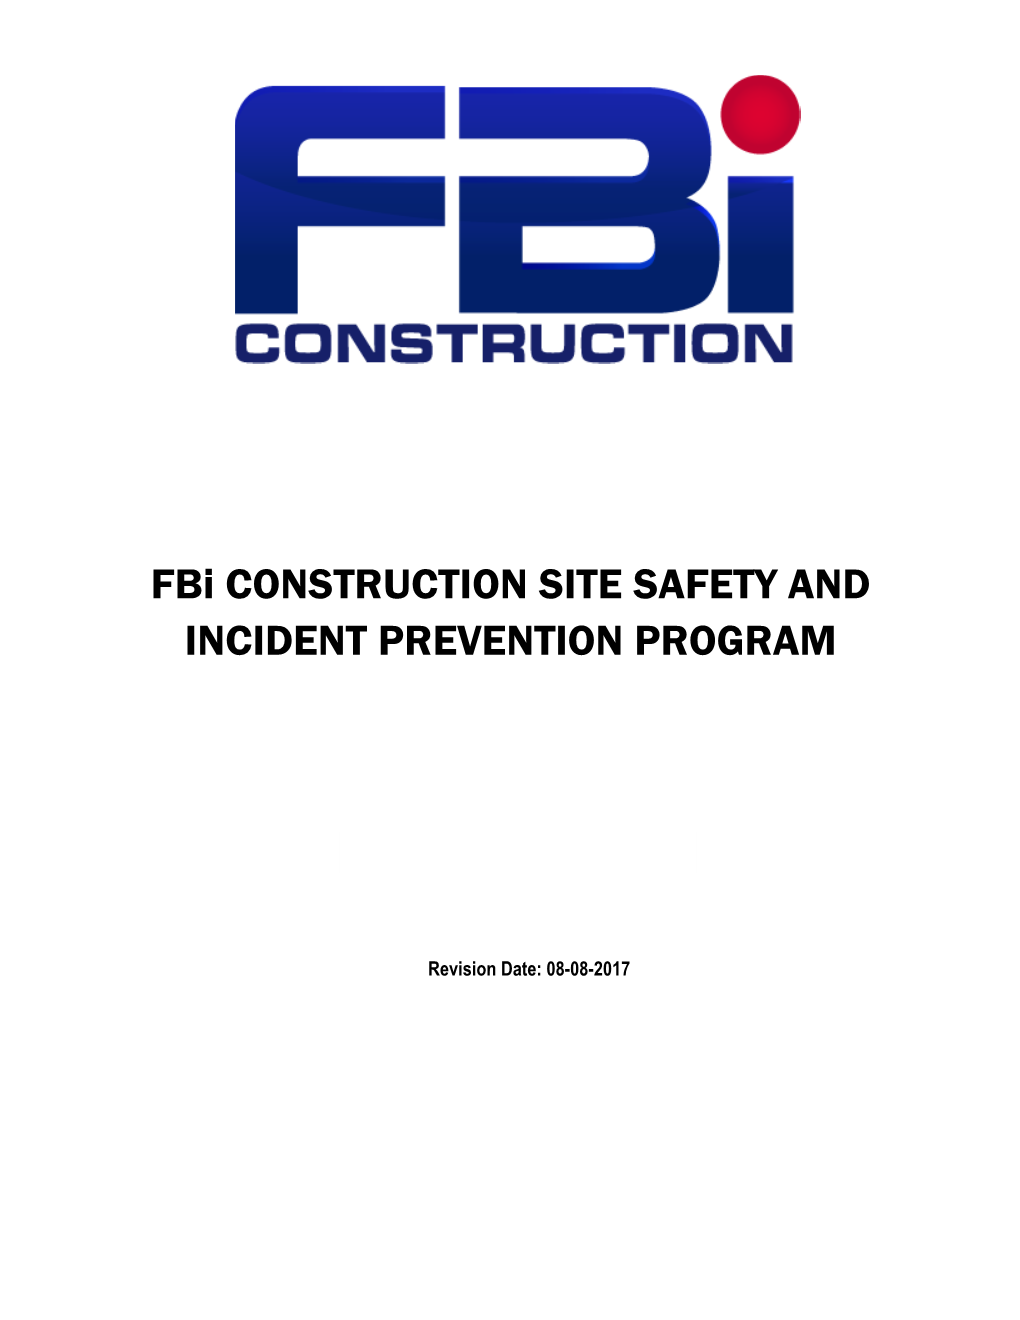 Fbi CONSTRUCTION SITE SAFETY and INCIDENT PREVENTION PROGRAM